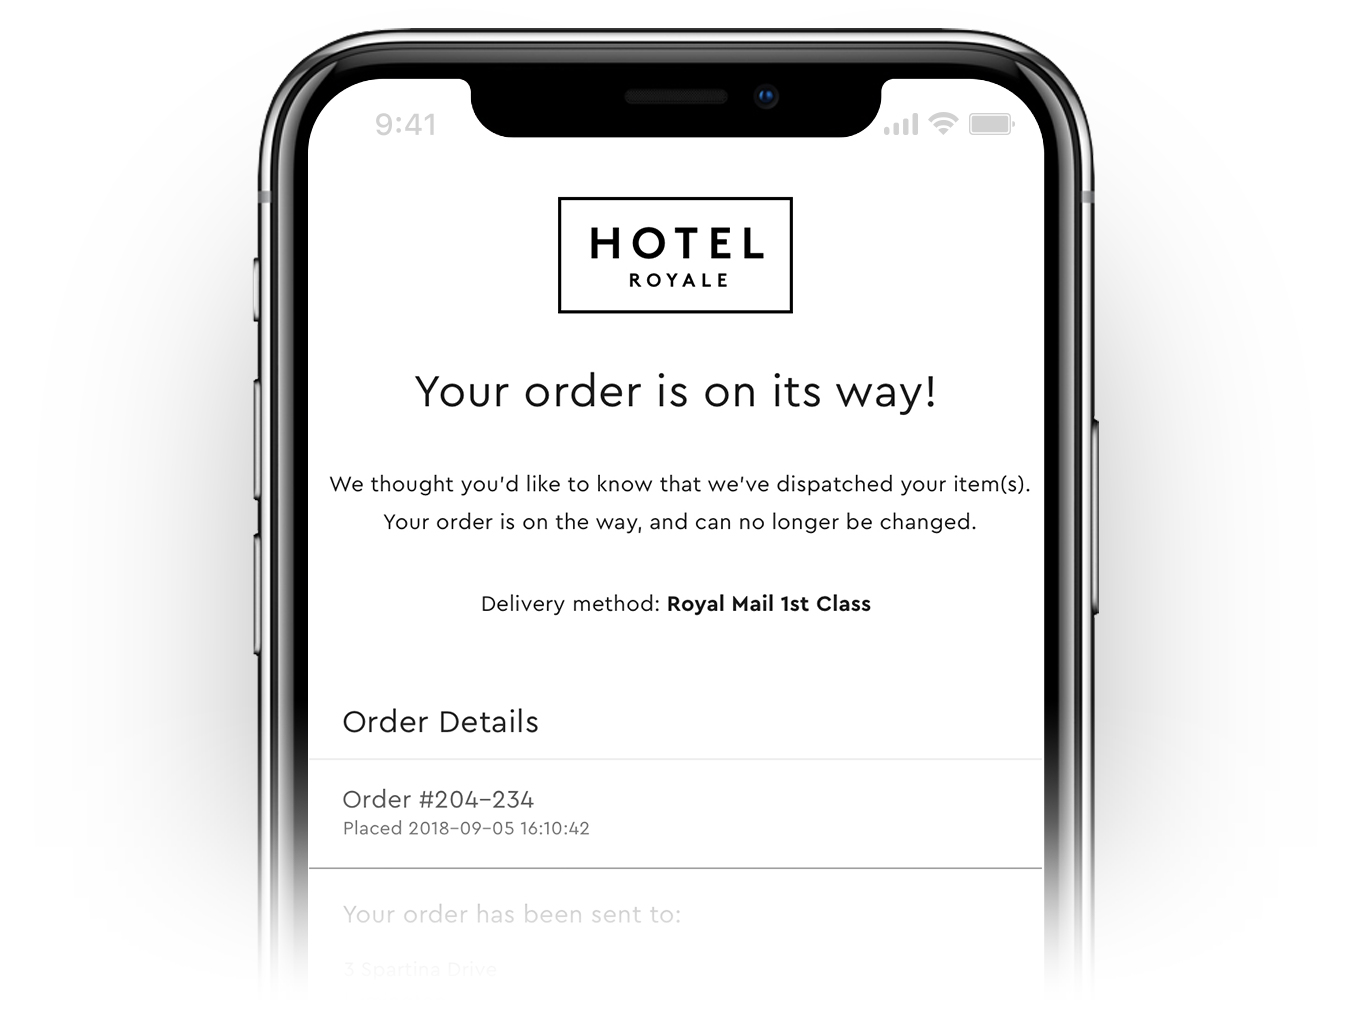 iPhone showing a dispatched order notification email